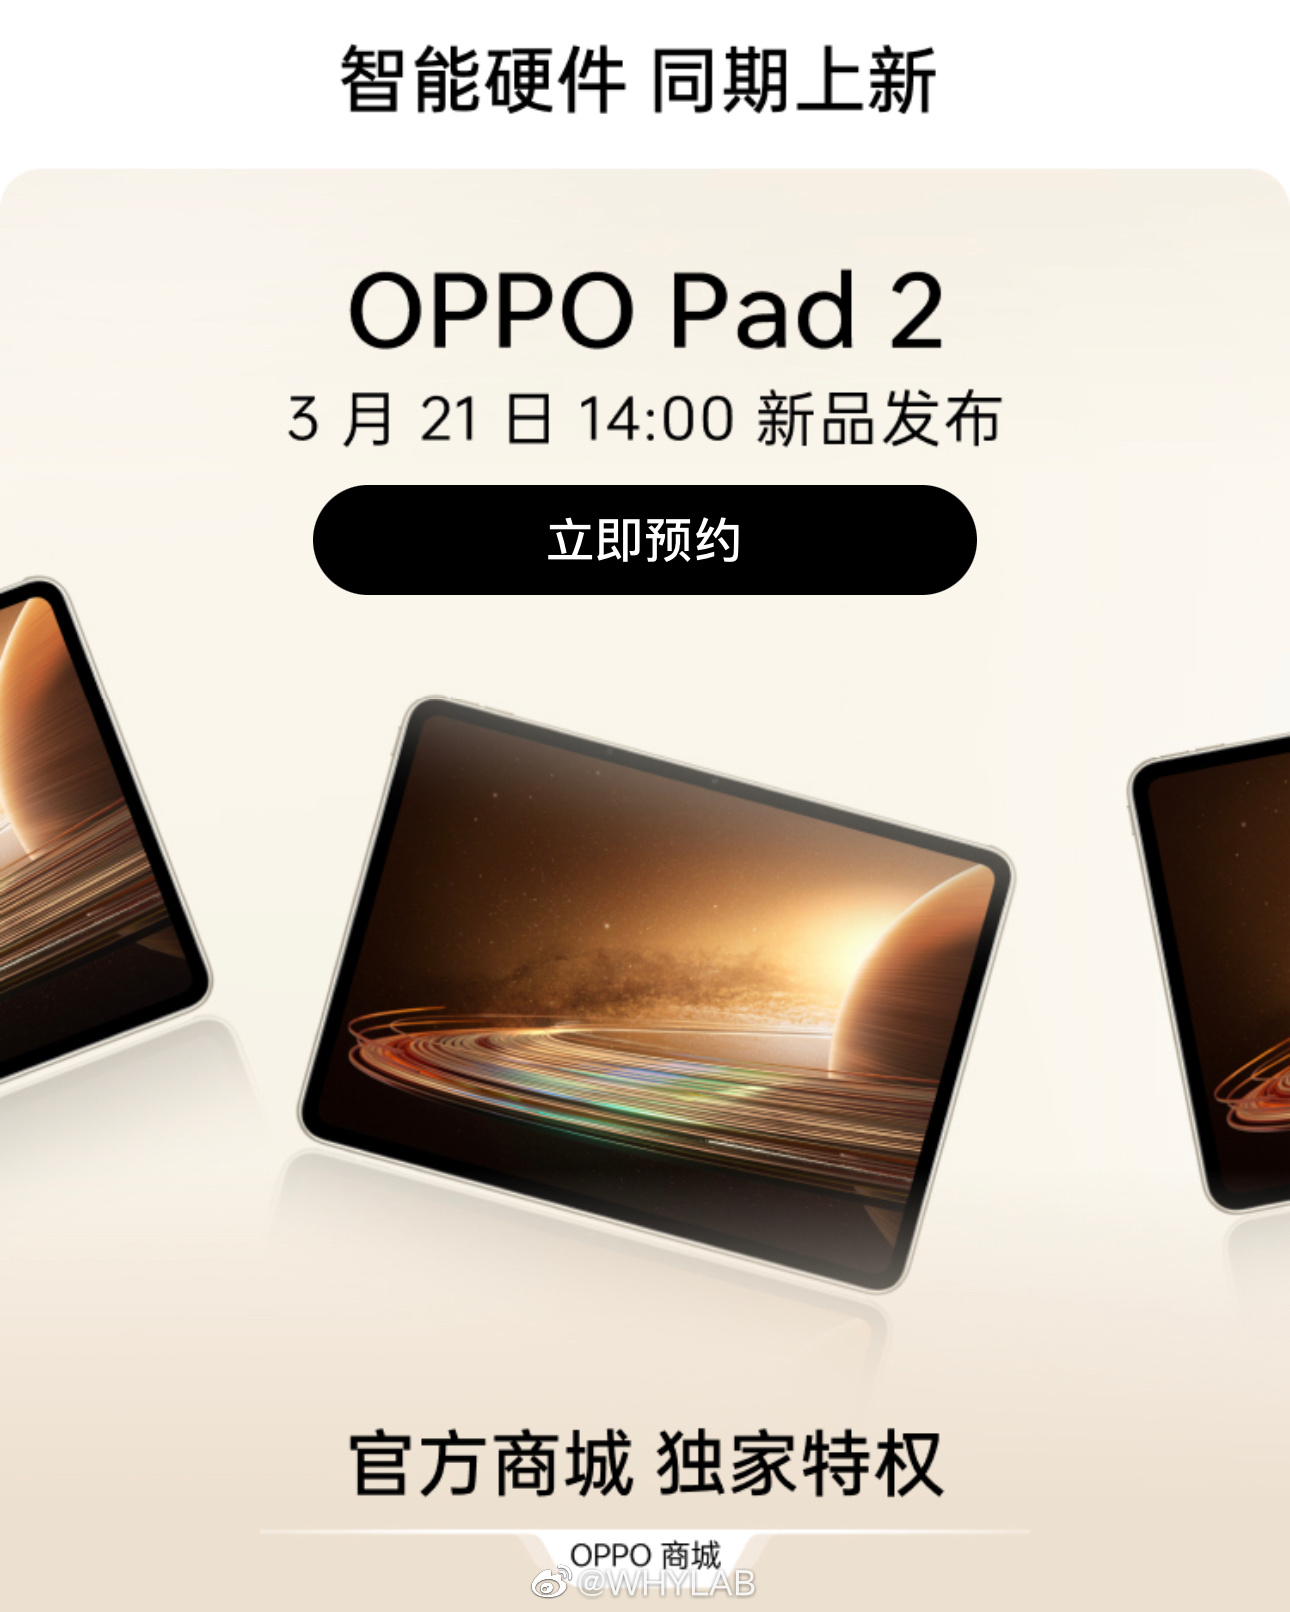 OPPO Pad 2 Launch Poster